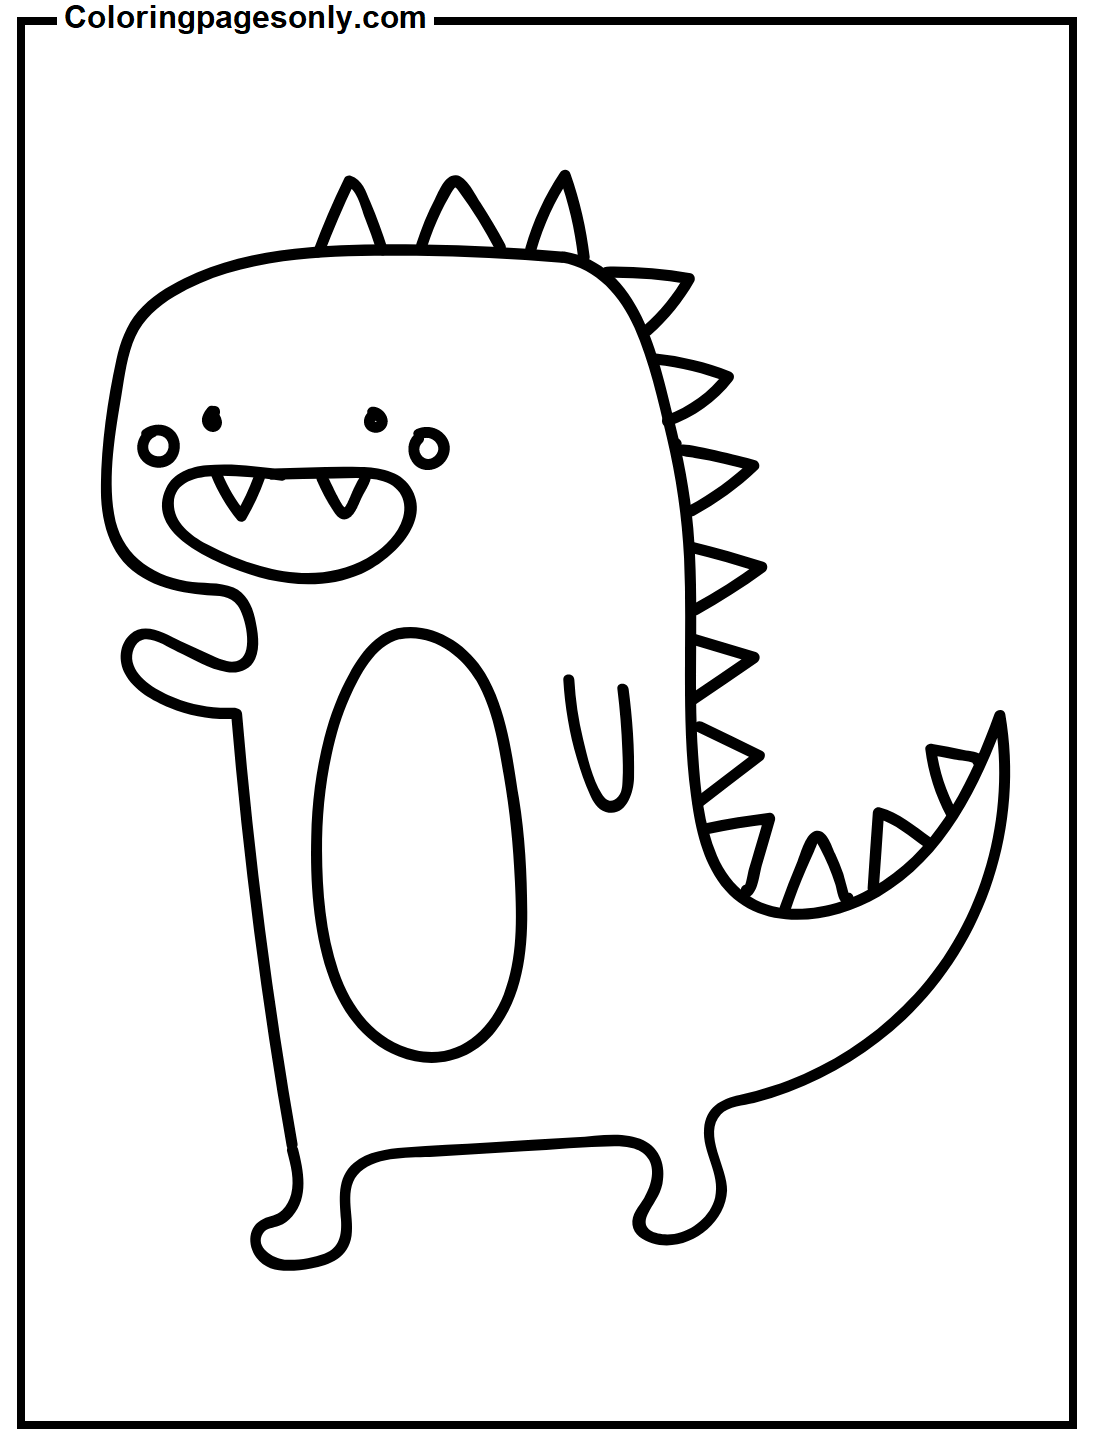 Waving T-Rex Coloring Pages